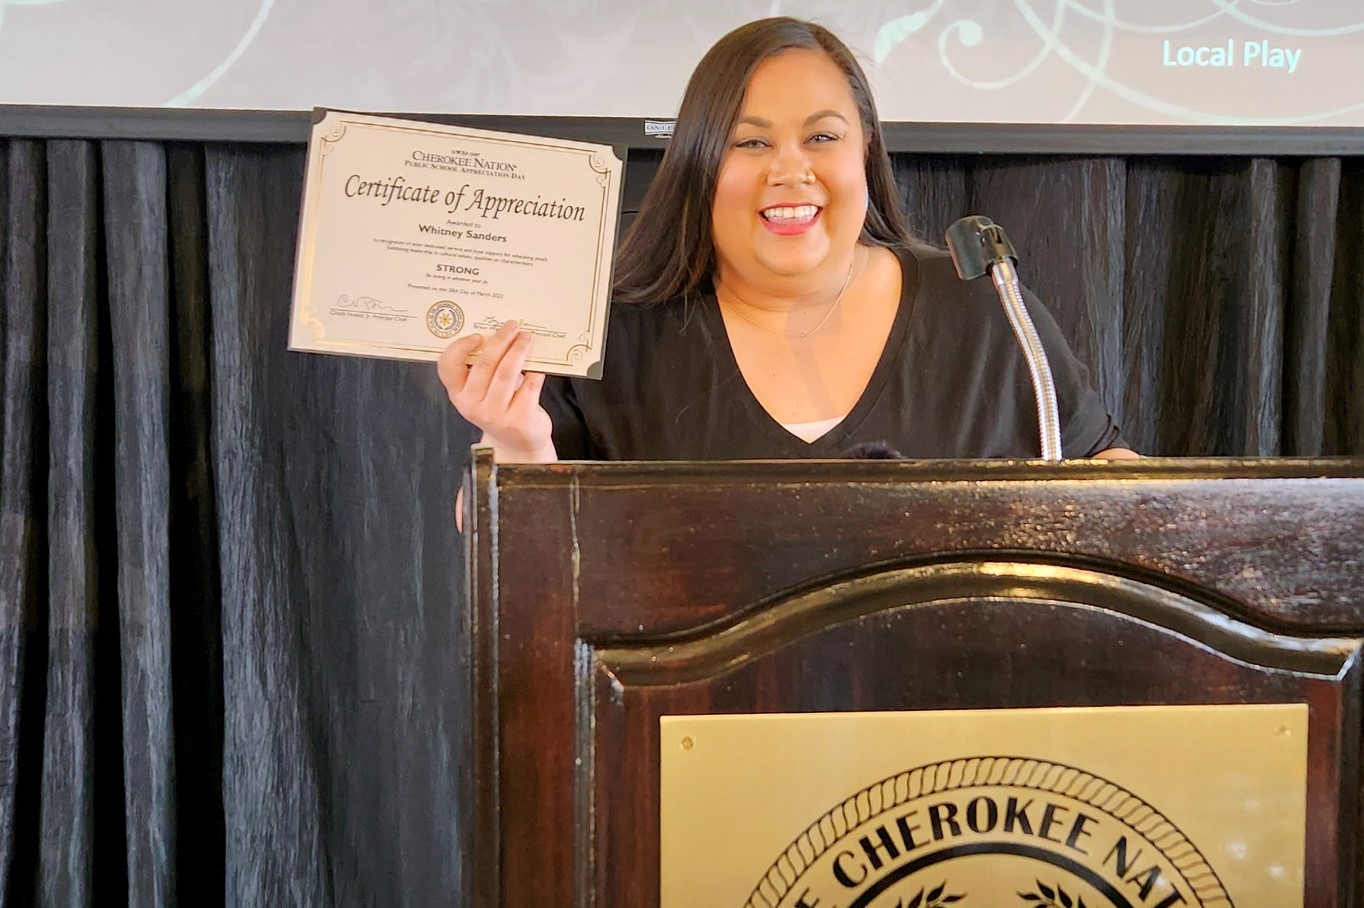 Whitney Sanders holding Certificate of Appreciation from the Cherokee Nation